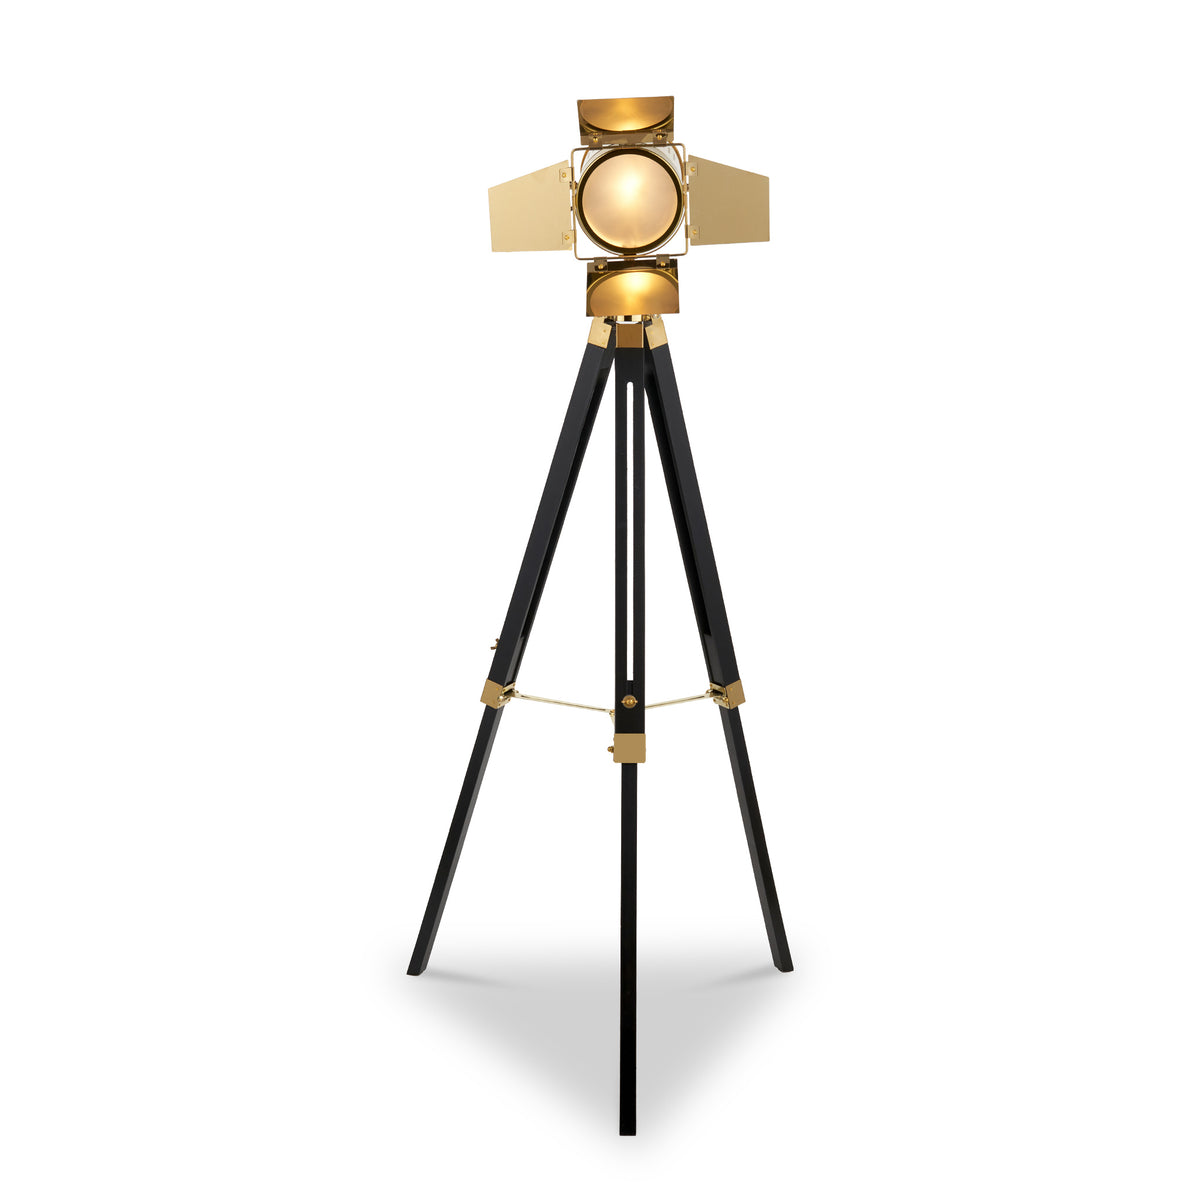 Hereford Gold and Black Tripod Floor Lamp from Roseland Furniture